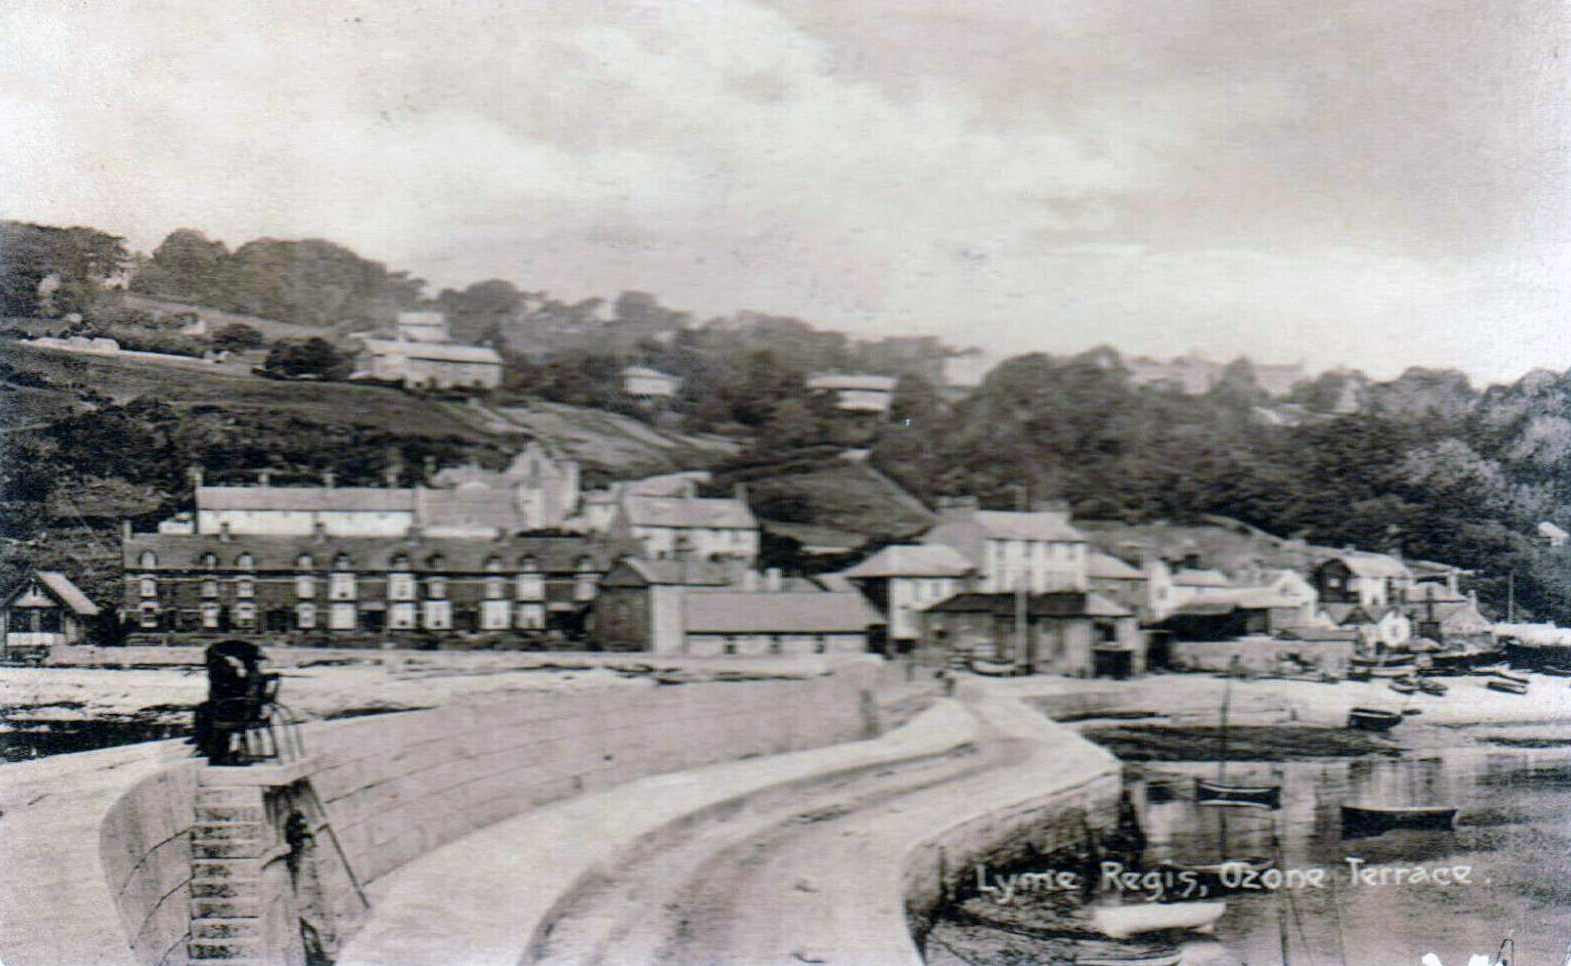 View from the Cobb towards Ozone Terrace circa 1915